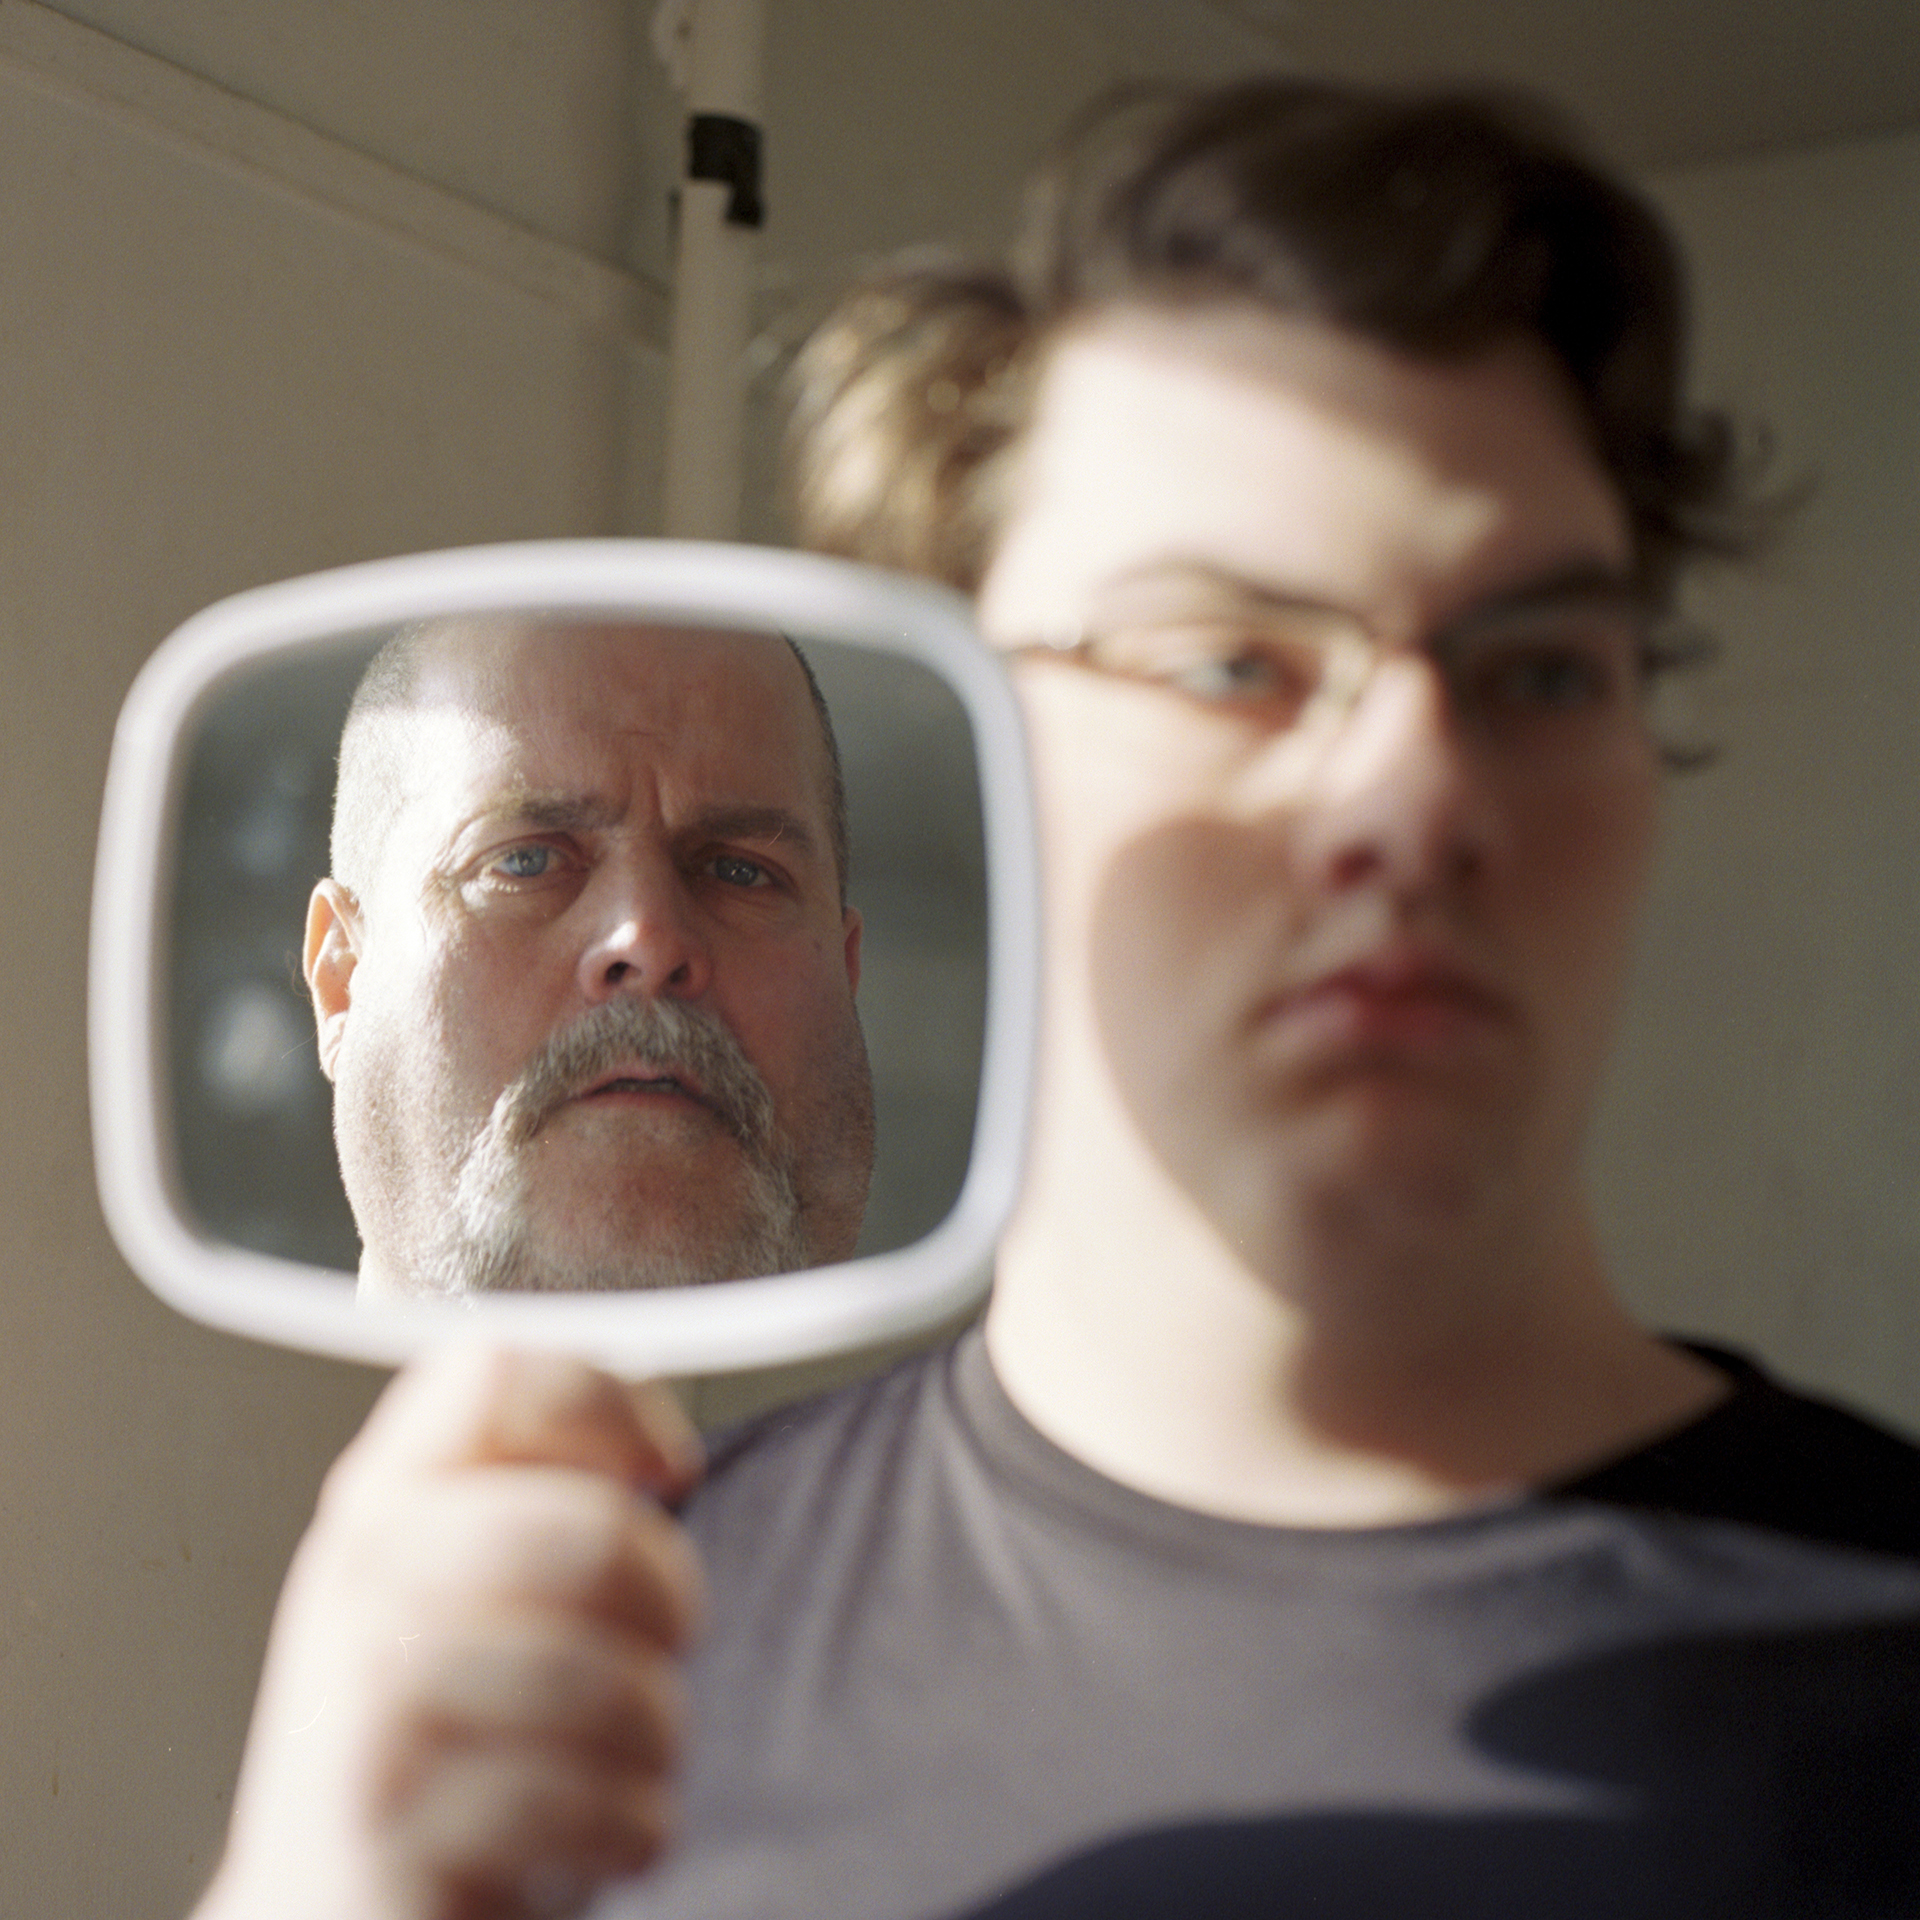 A man and son, the son holds a mirror that reflects the image of his father's face.